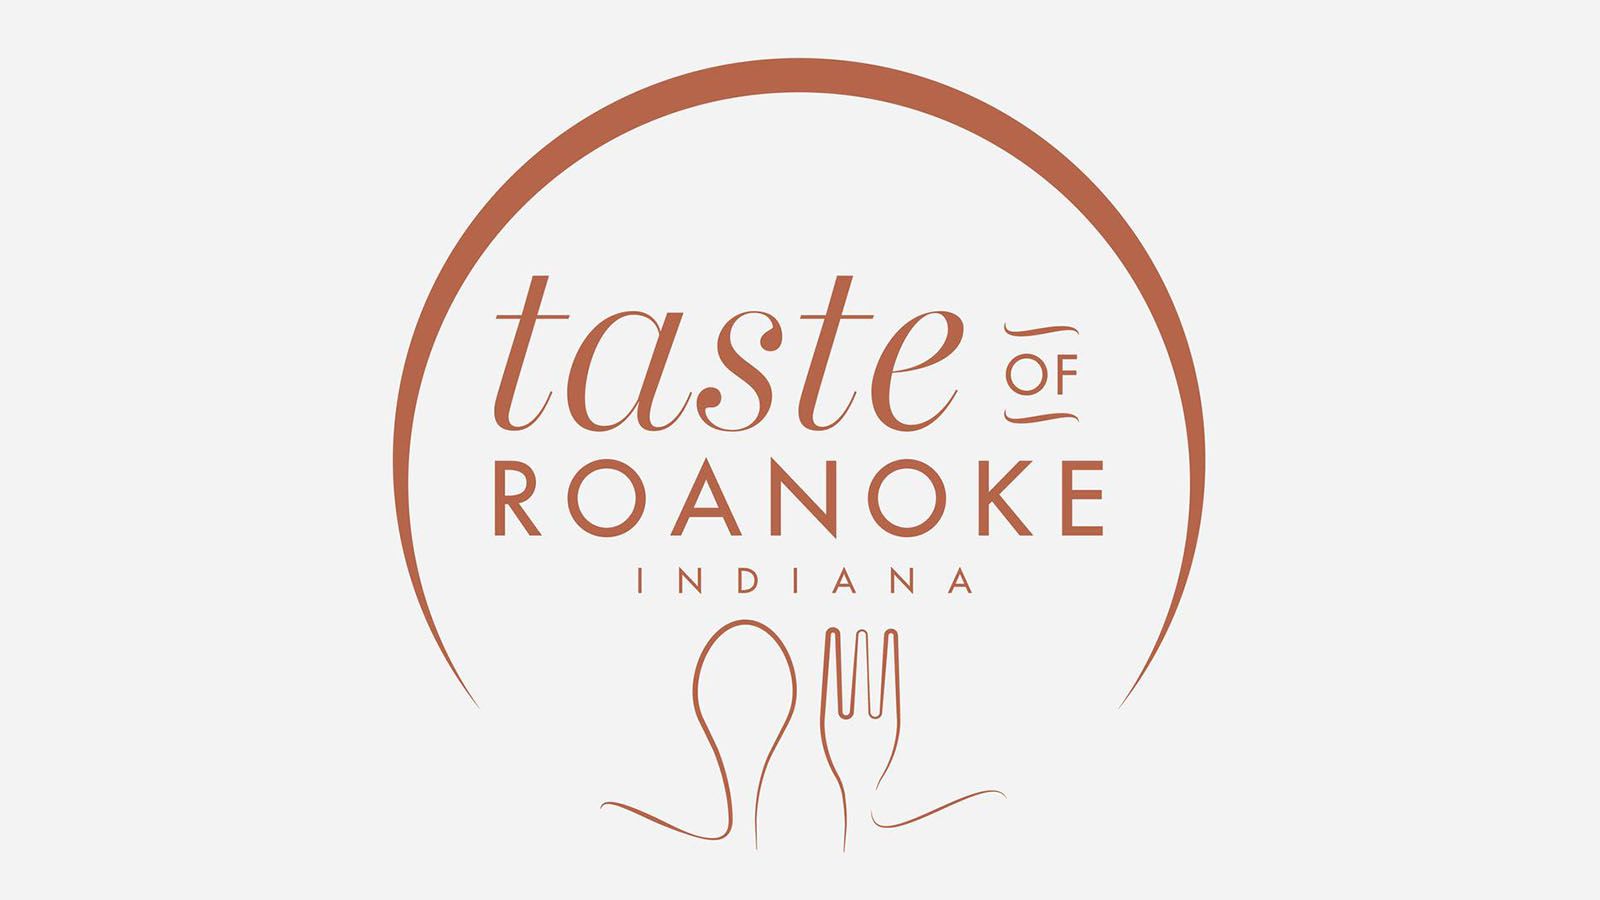 Restaurants will have special deals during Taste of Roanoke, which begins March 1.